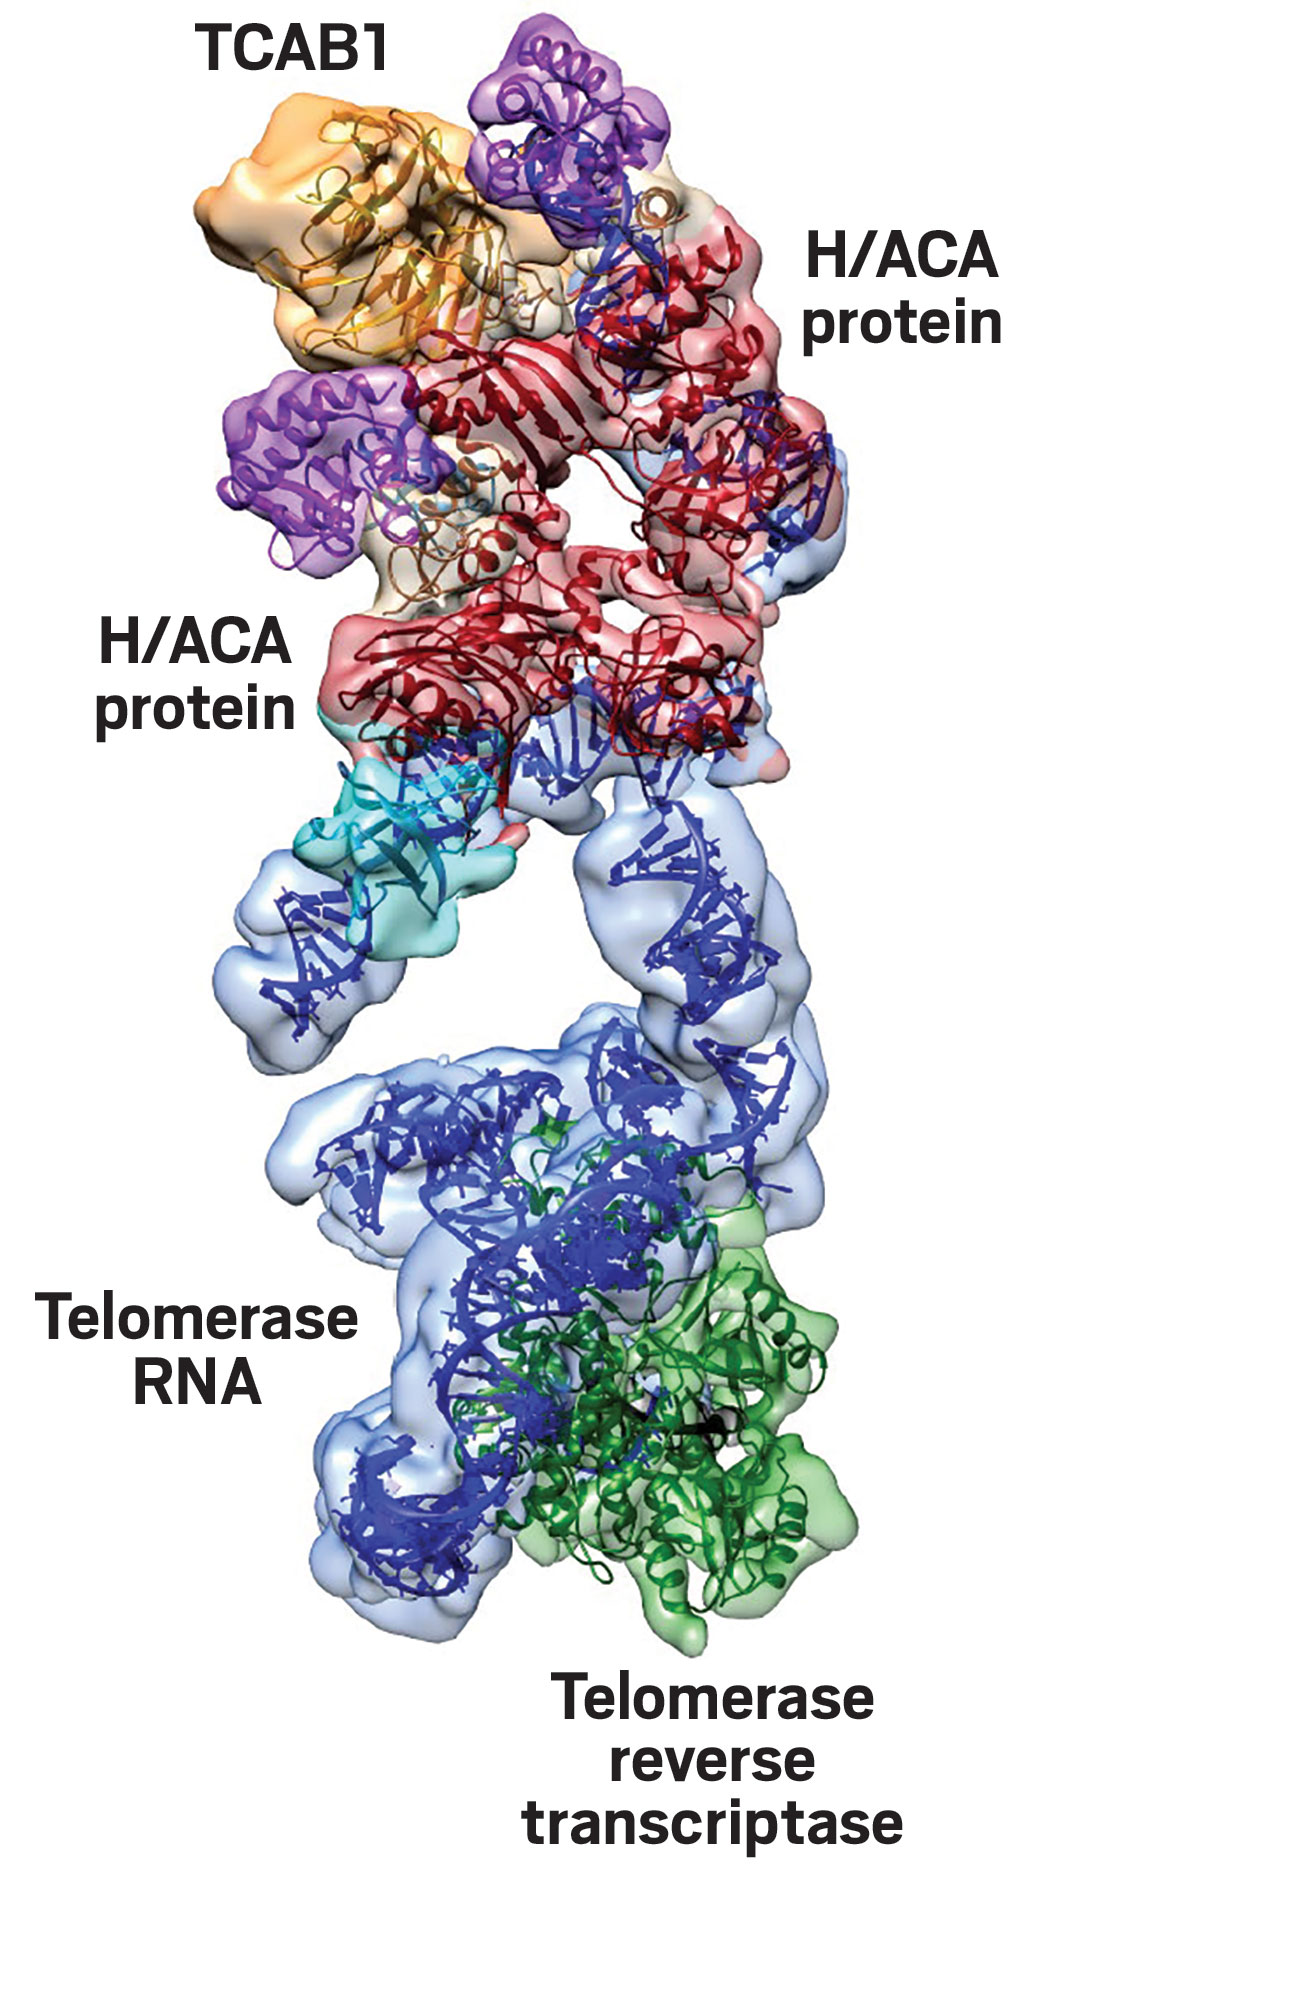 Clear View Of Telomerase At Last